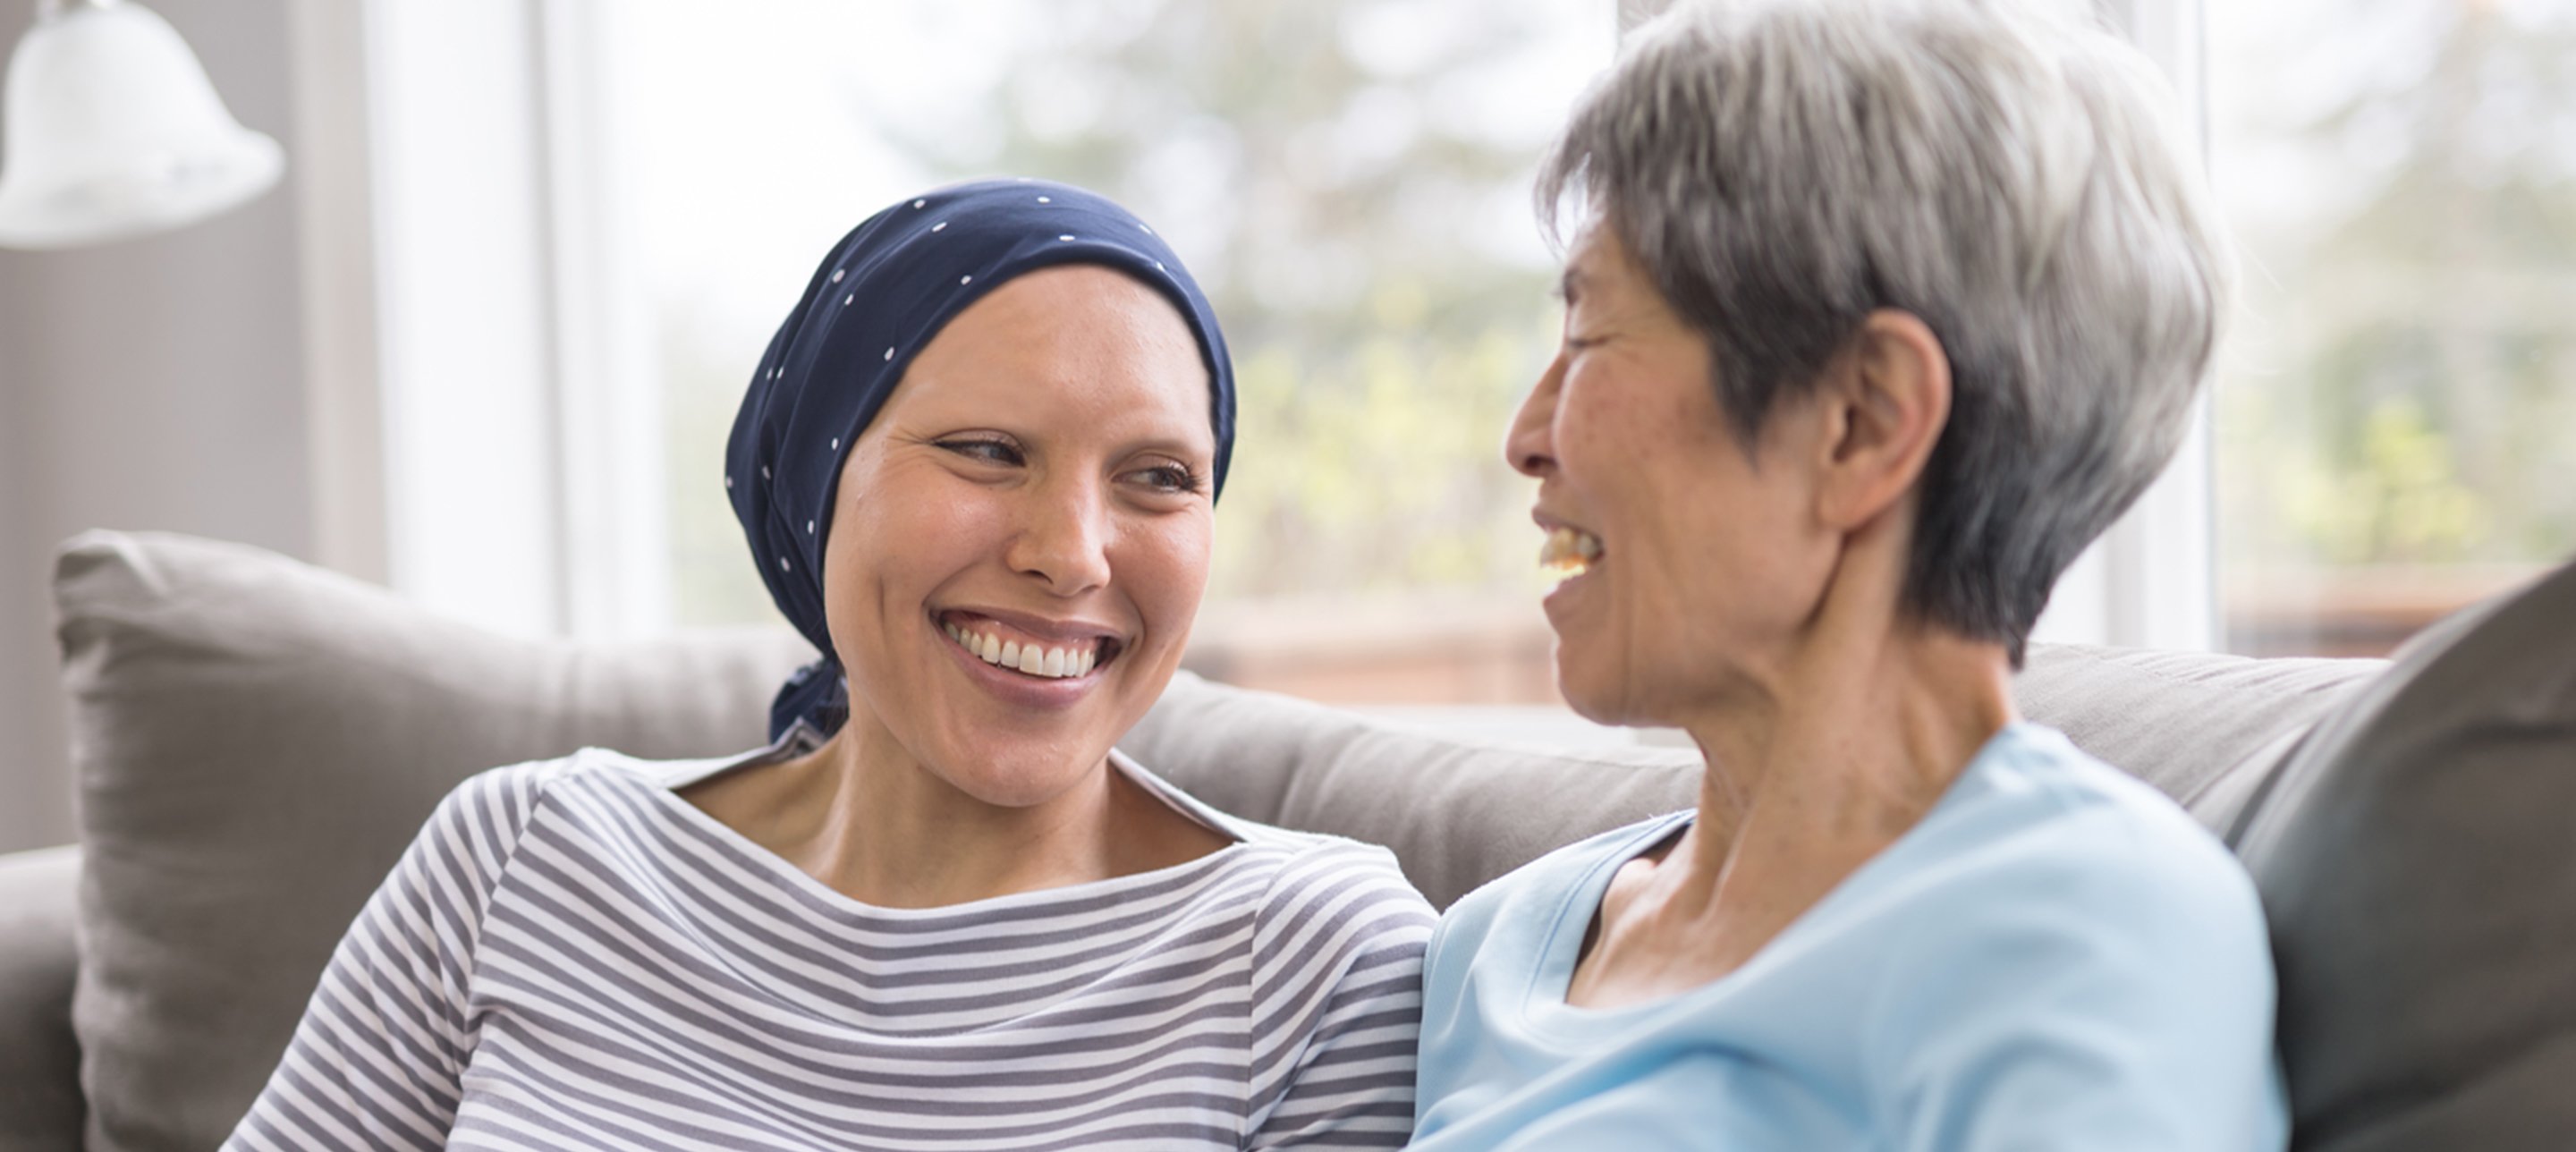 Cancer Support Groups